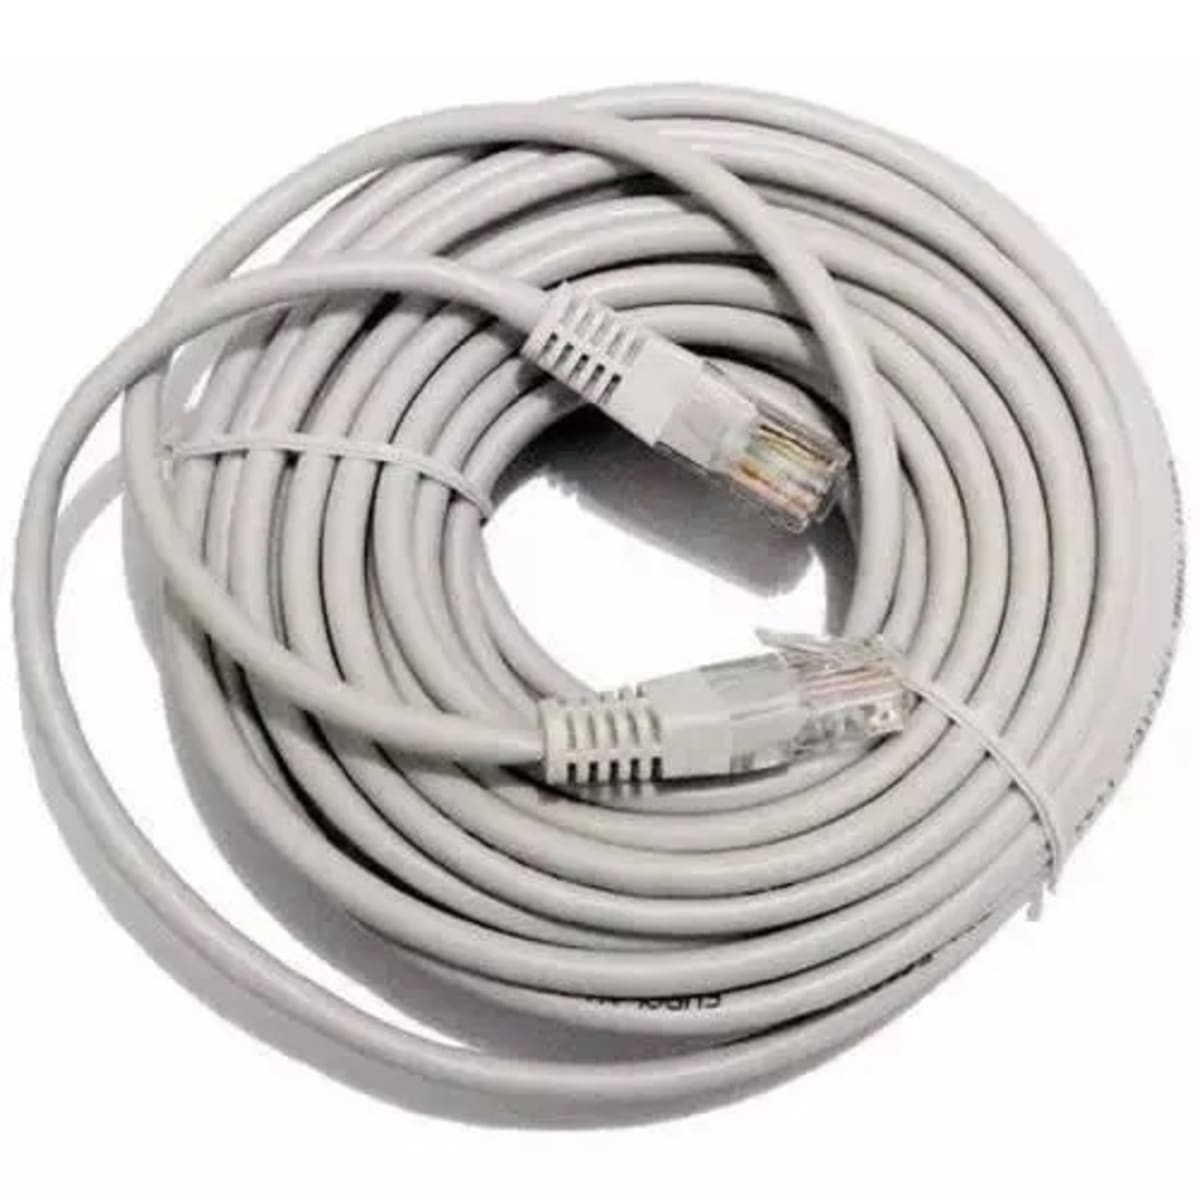 Cable Ethernet 10m